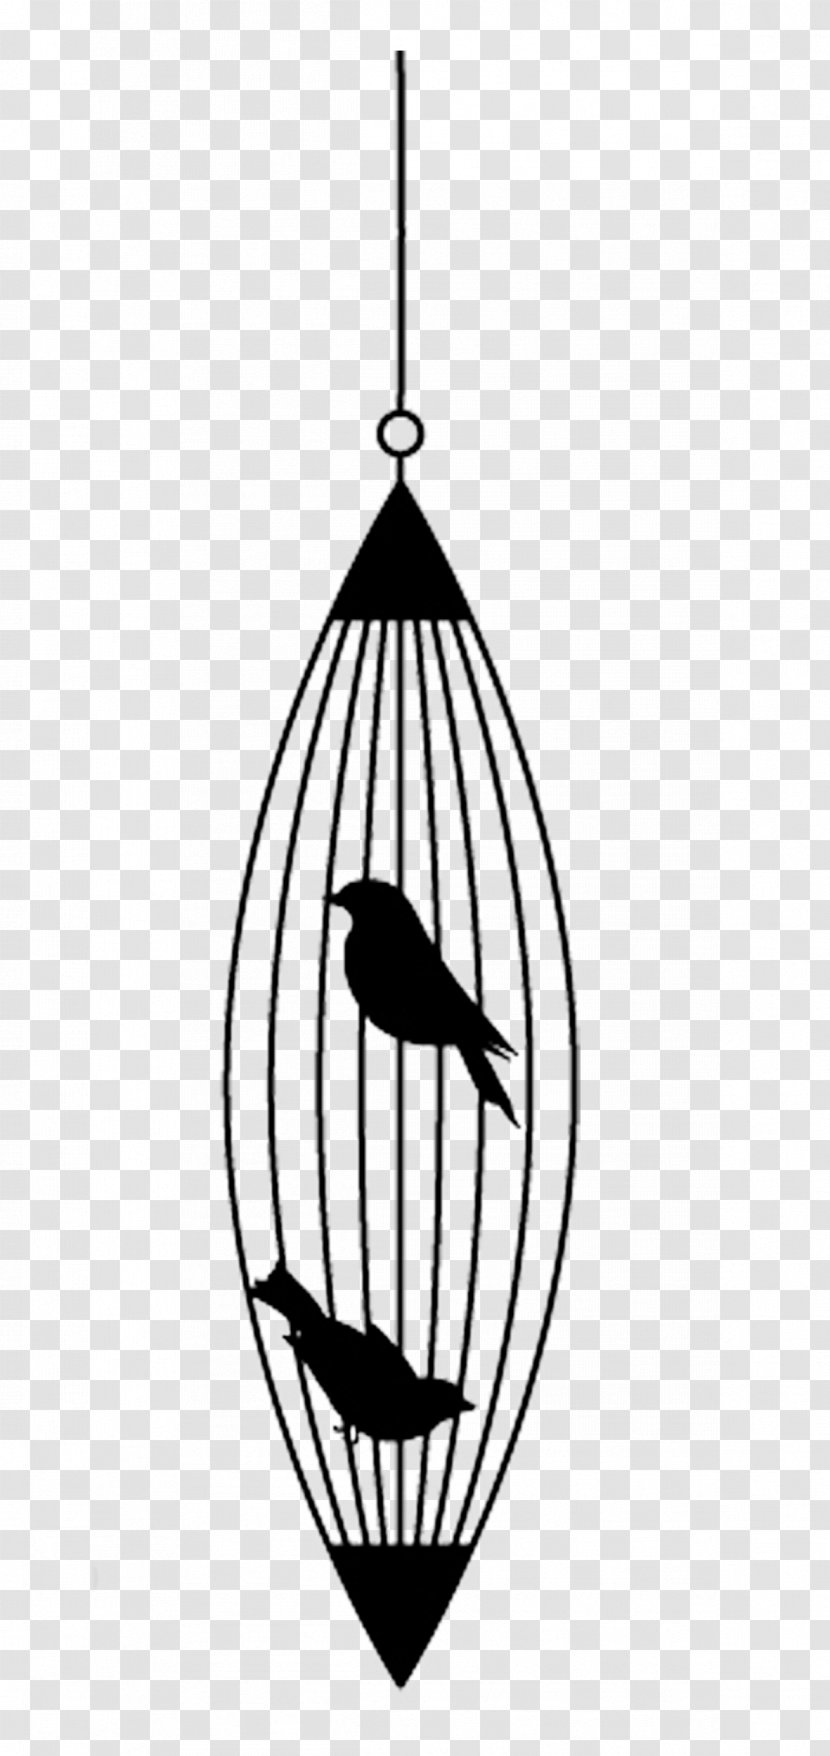 Oval Bird Cage - Product Design - Monochrome Transparent PNG